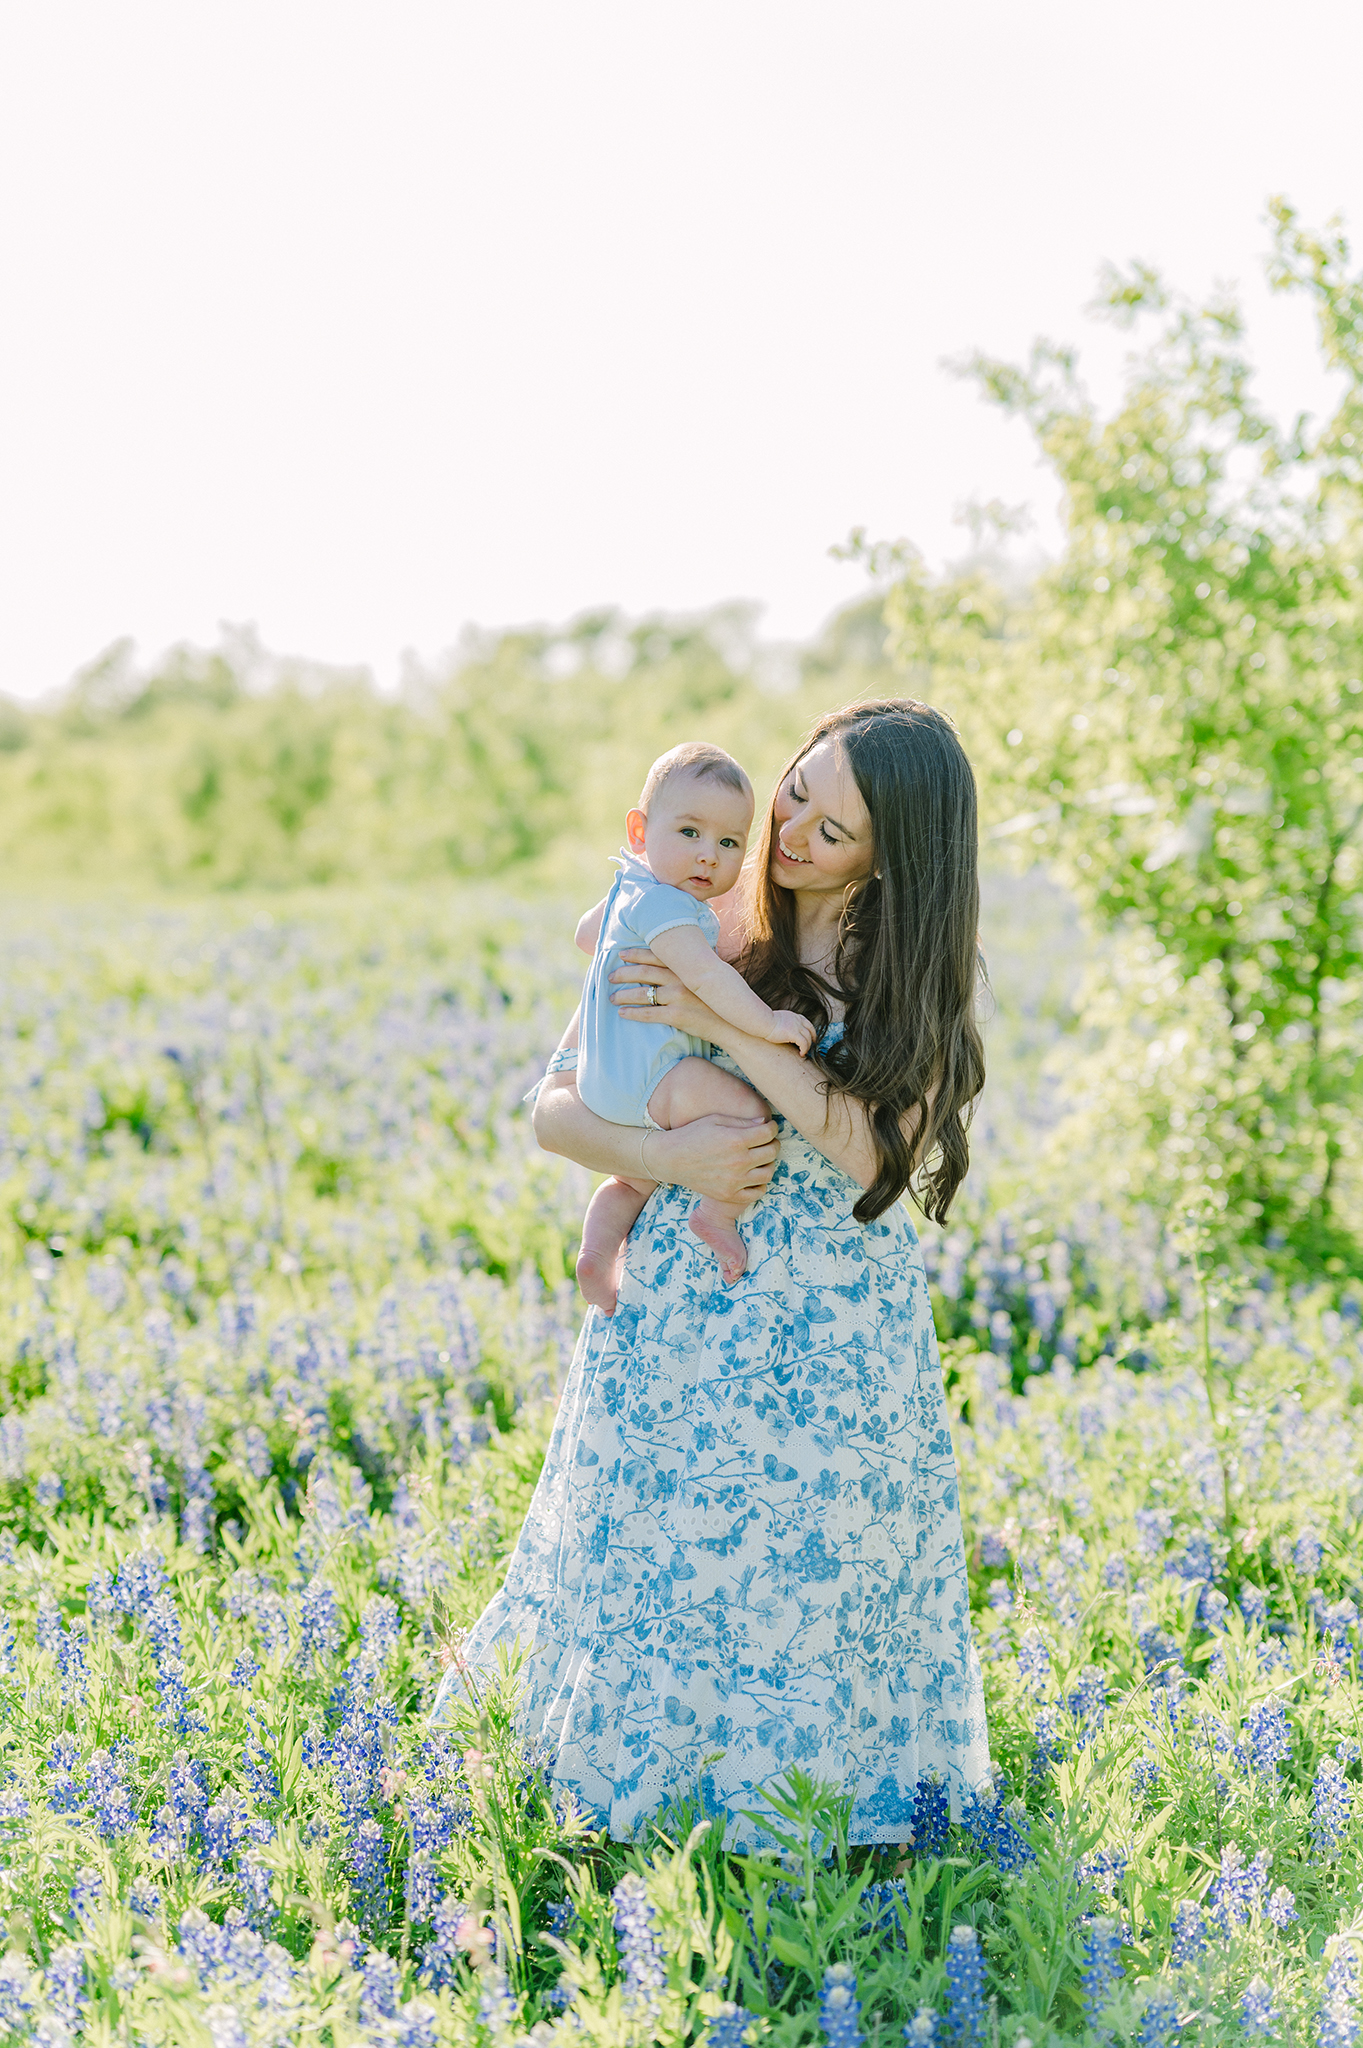 Mother adoring her baby in a field of bluebonnets in Dallas